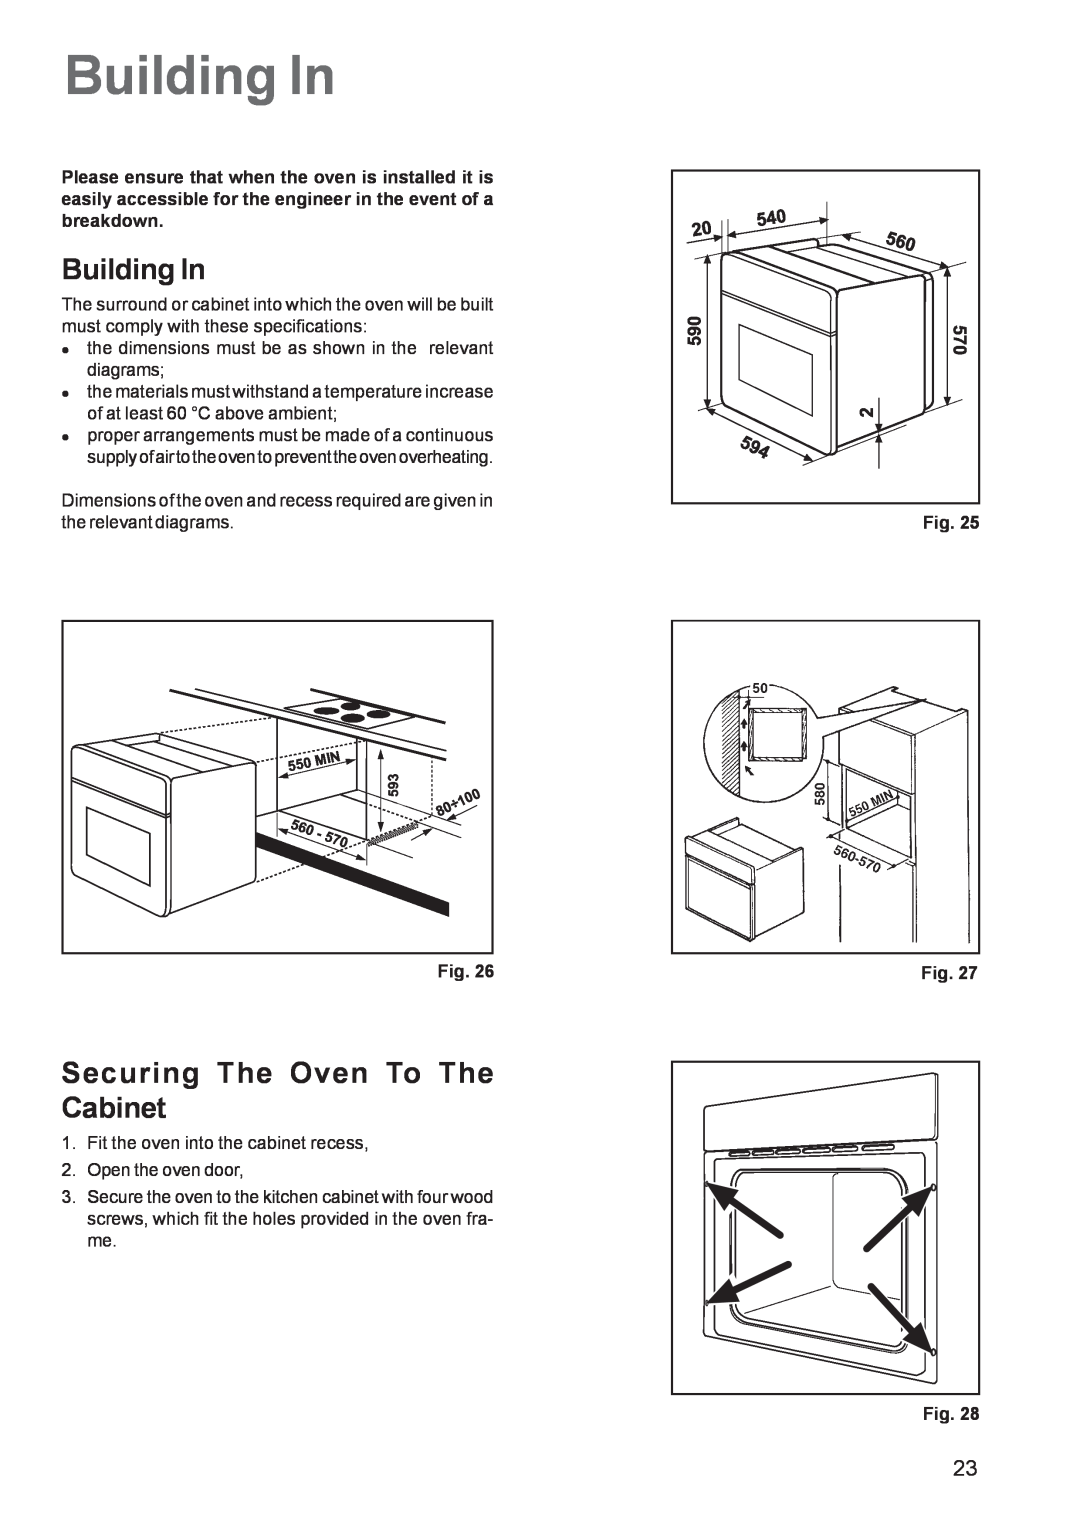 Zanussi ZPB 1260 manual Building In, Securing The Oven To The Cabinet 